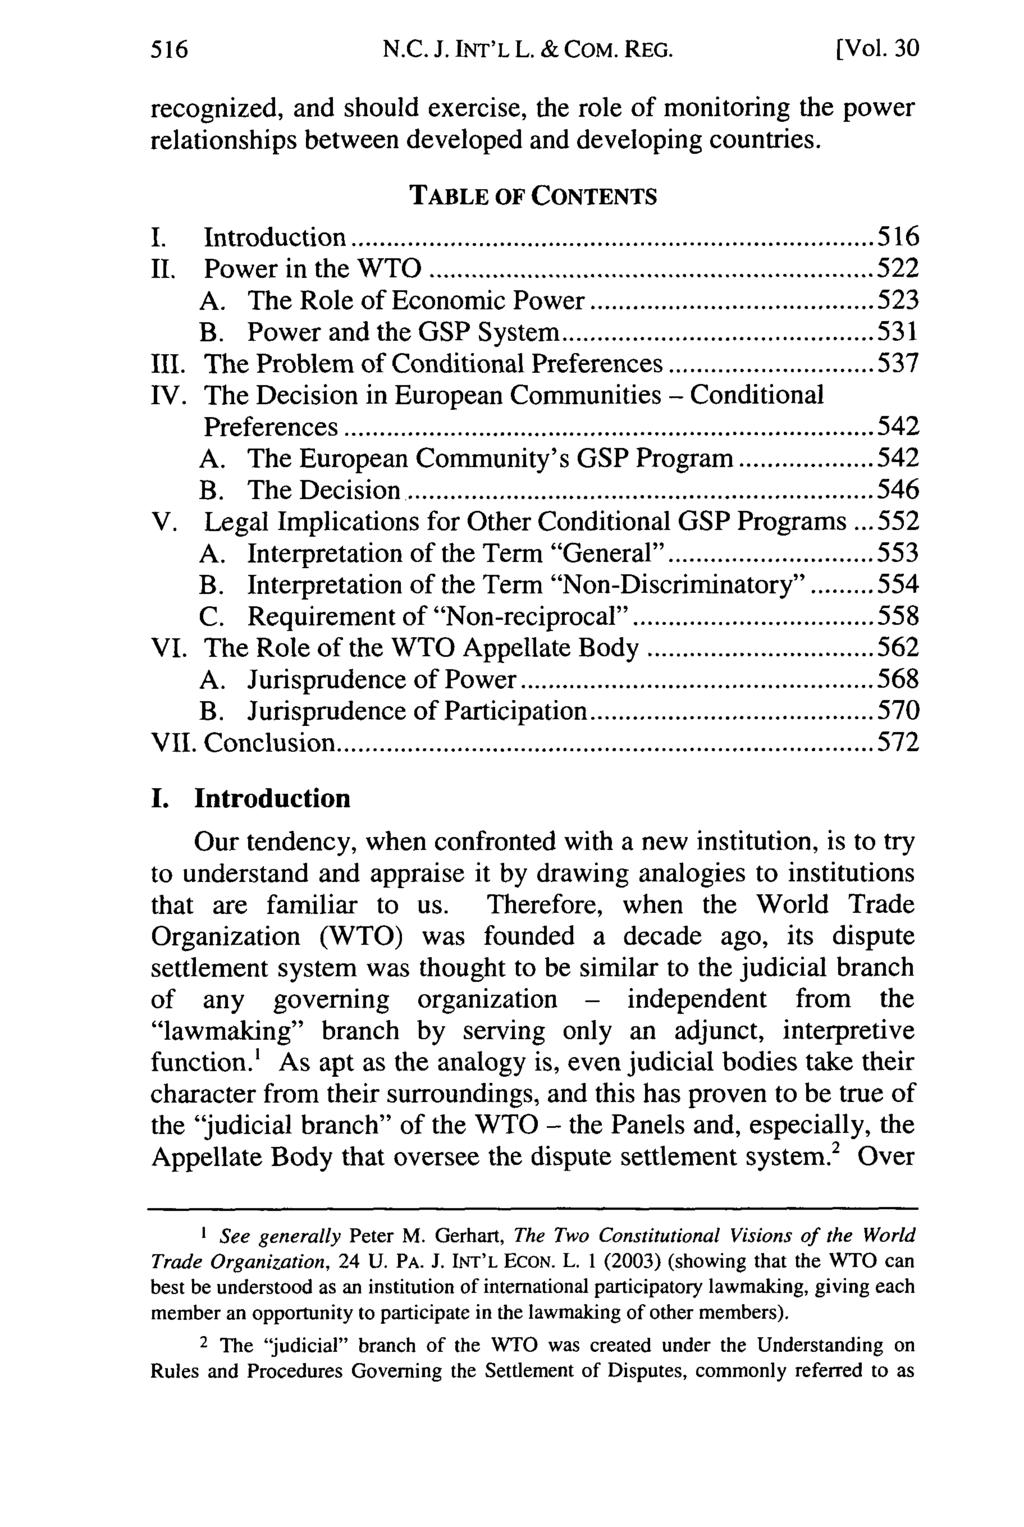 N.C. J. INT'L L. & COM. REG. [Vol. 30 recognized, and should exercise, the role of monitoring the power relationships between developed and developing countries. TABLE OF CONTENTS I. Introduction.